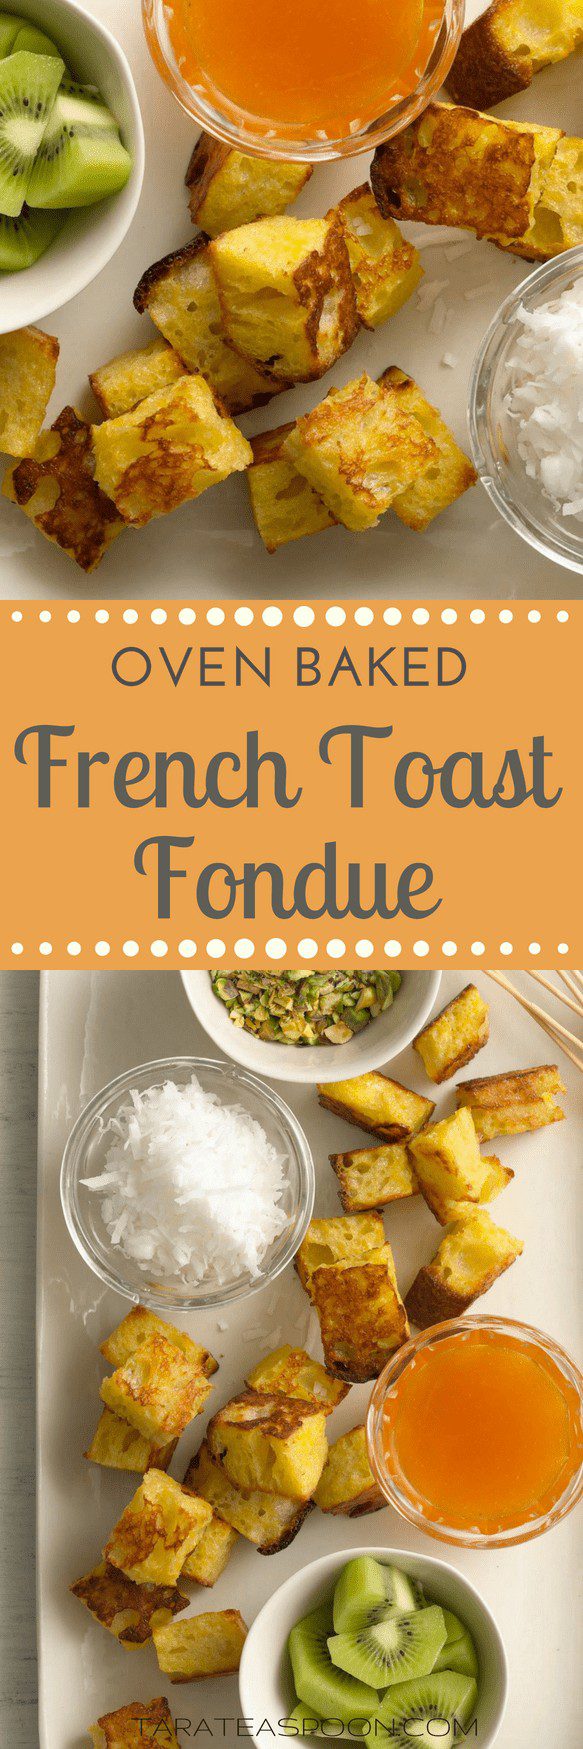 Oven Baked French Toast Fondue to make for brunch